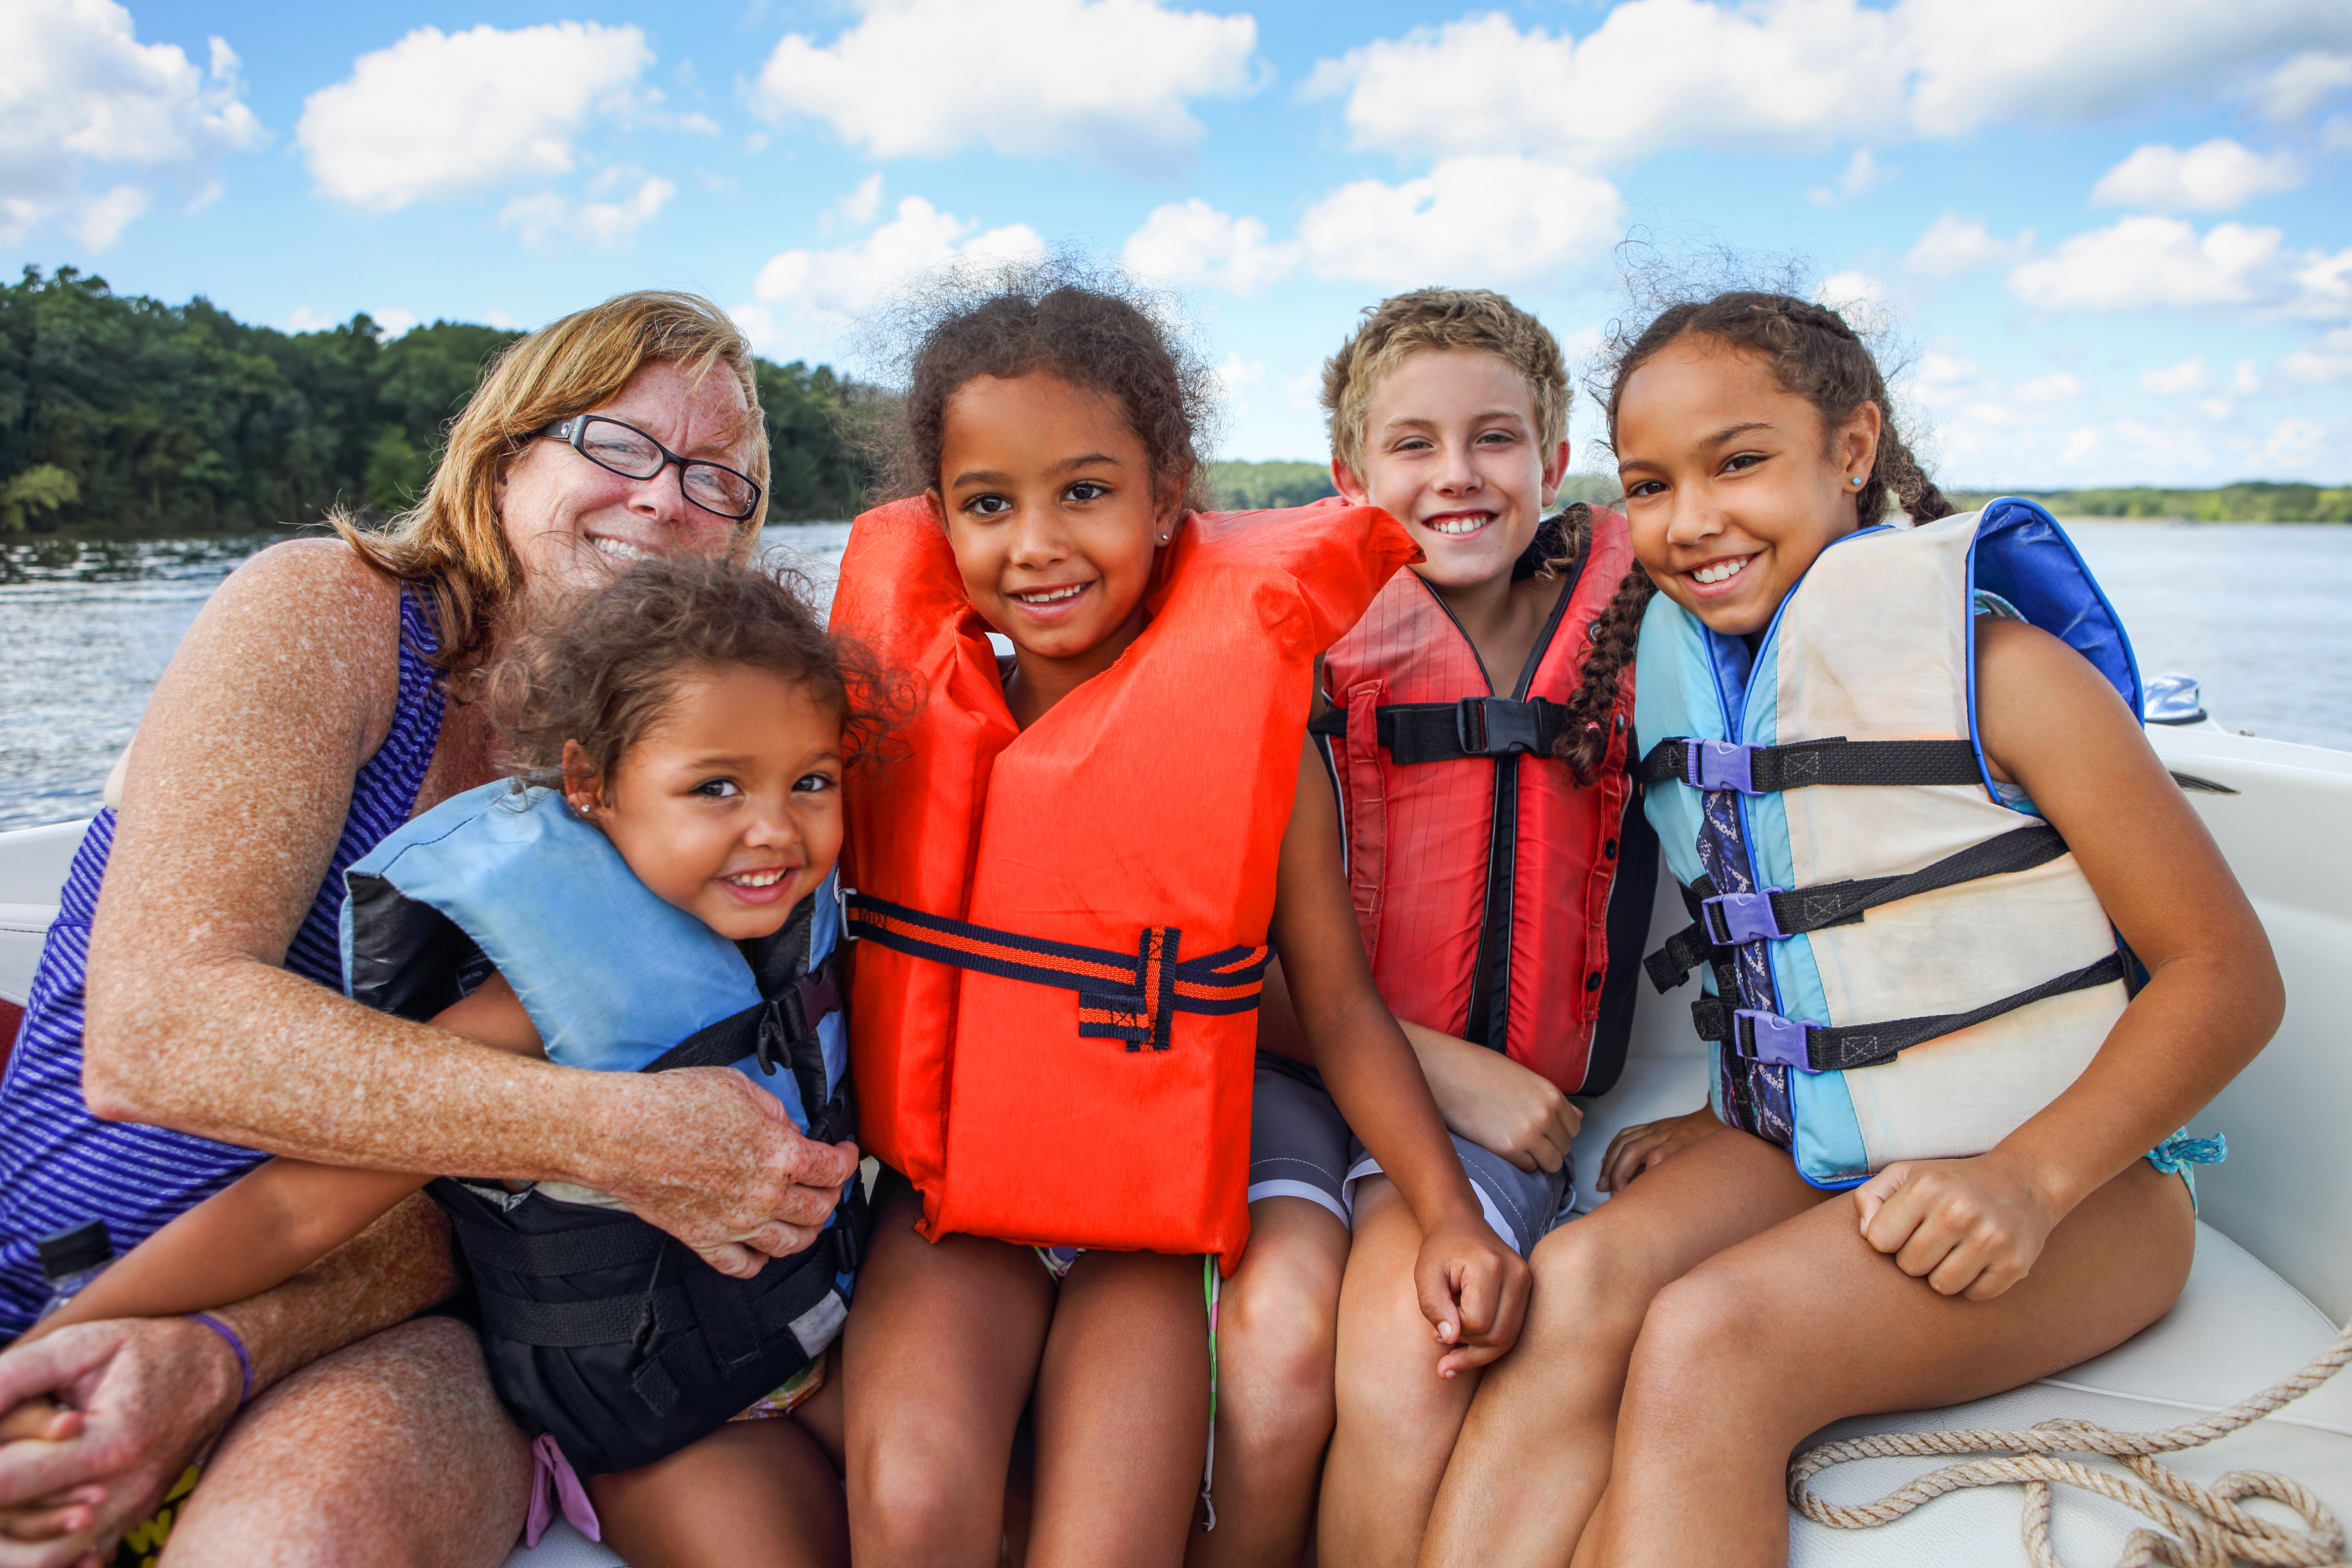 Children wearing life jackets on a boat, boater education concept. 